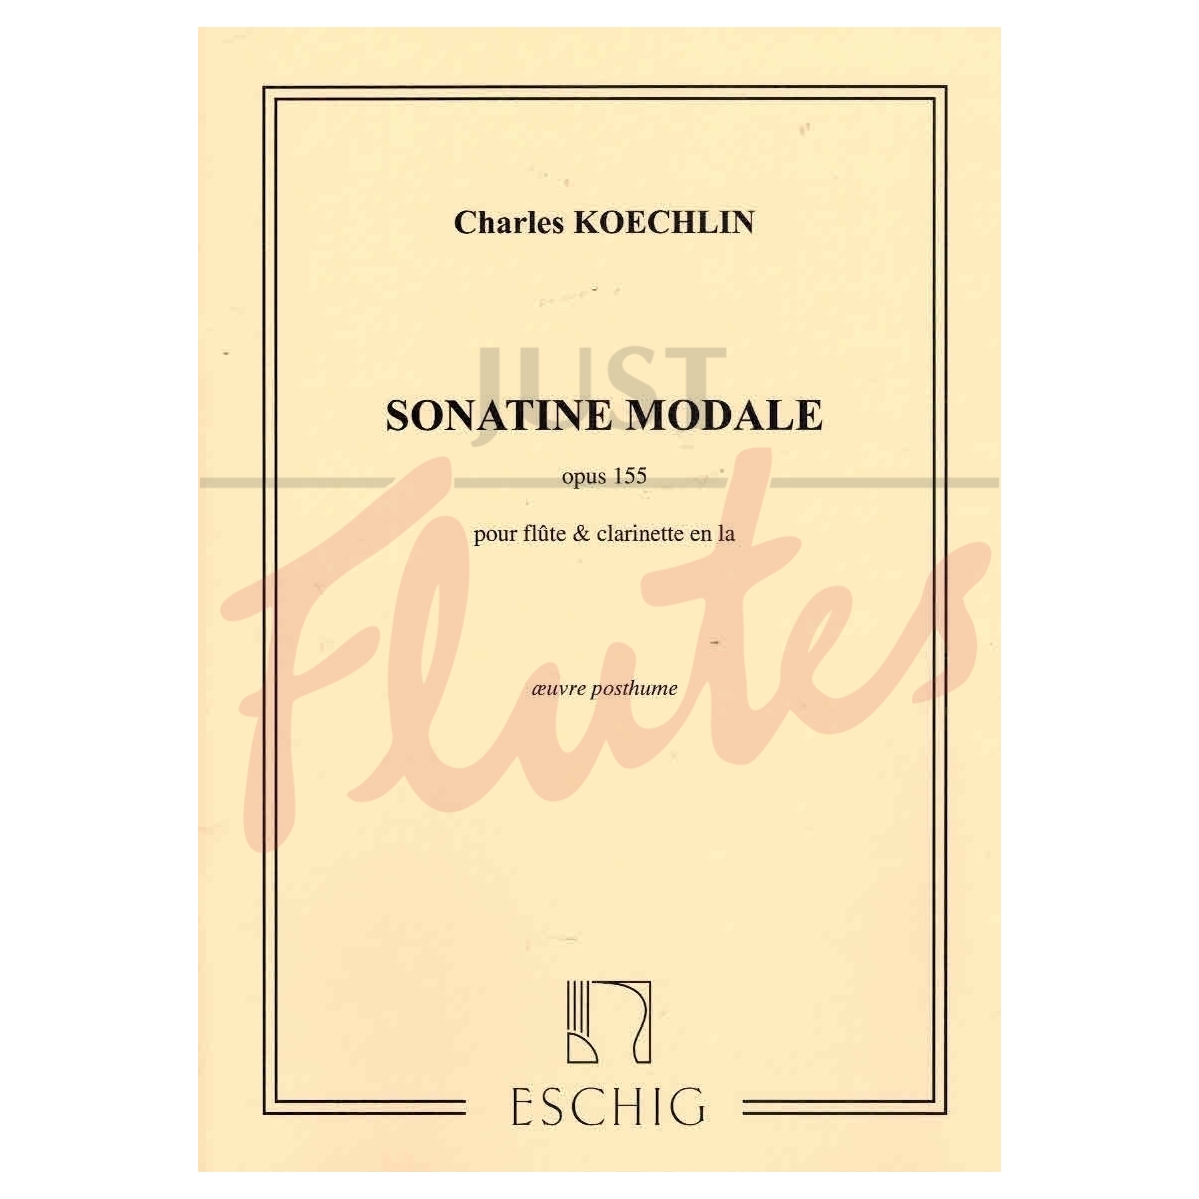 Sonatine Modale for Flute and Clarinet in A